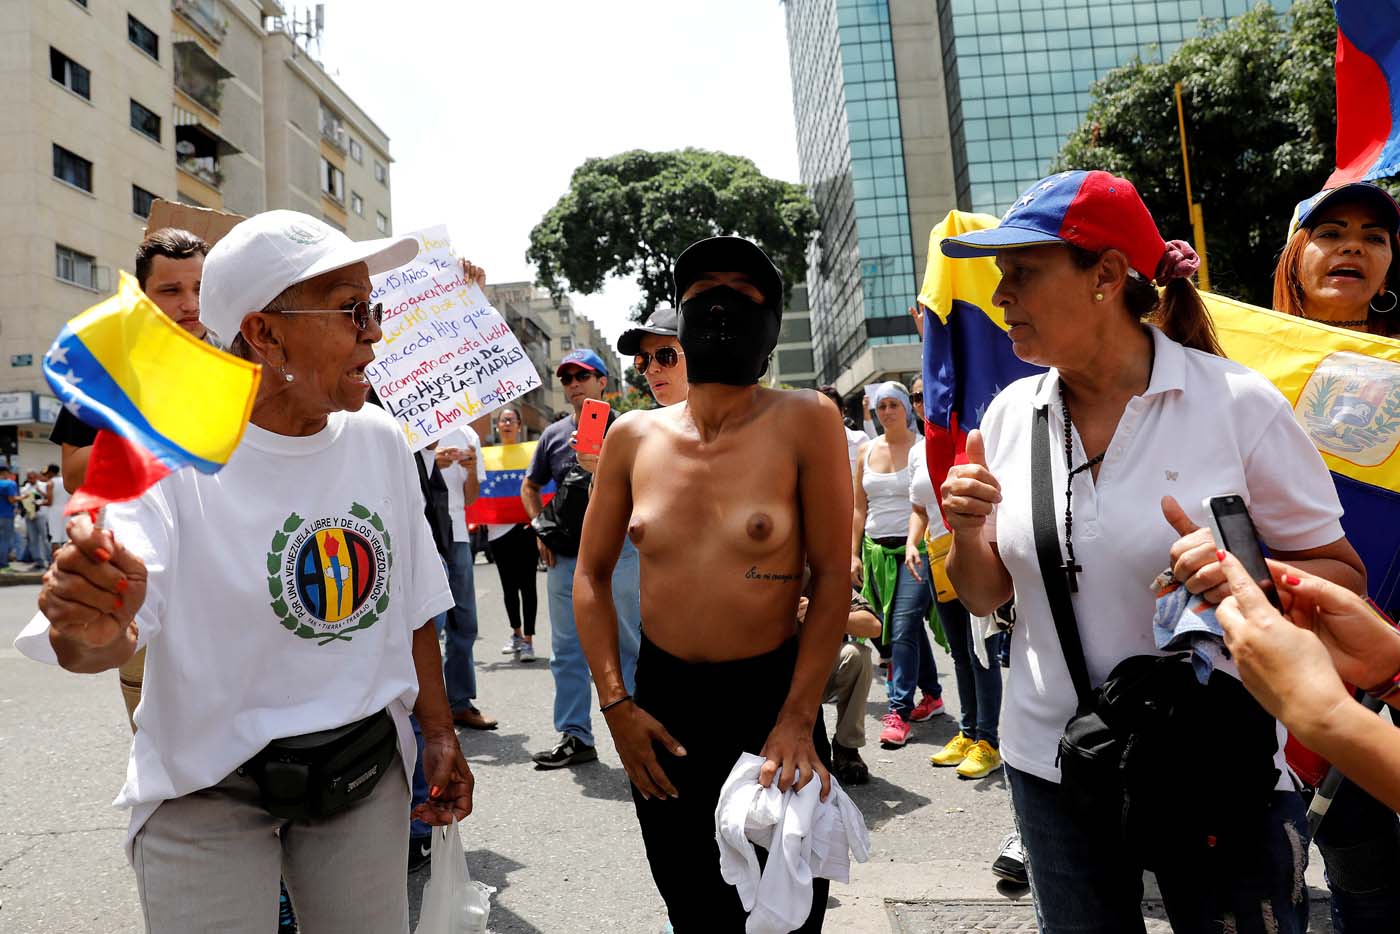 A woman wearing a mask attends a women's march to protest against President Nicolas Maduro's government in Caracas, Venezuela, May 6, 2017. REUTERS/Carlos Garcia Rawlins TEMPLATE OUT